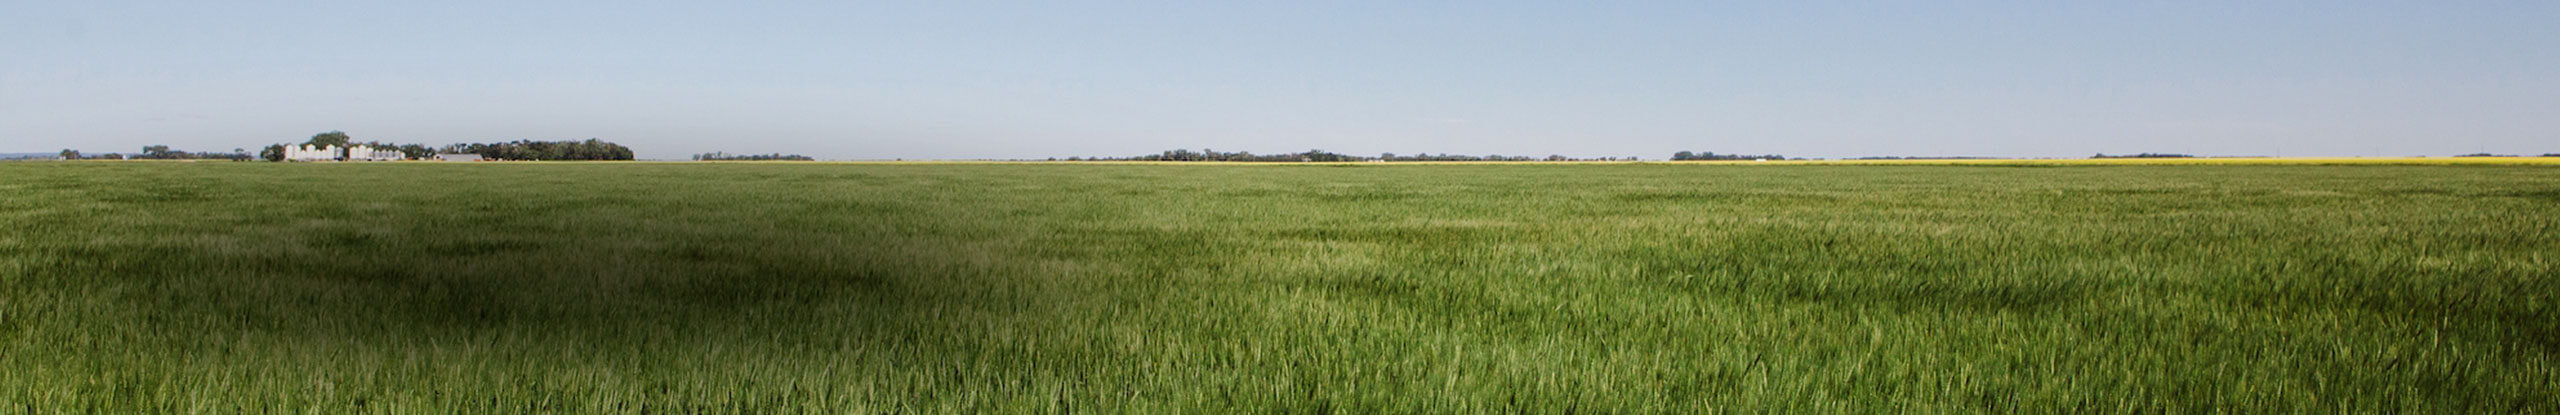 Factsheet: Quality of Spring Wheat Treated With a Plant Growth Regulator